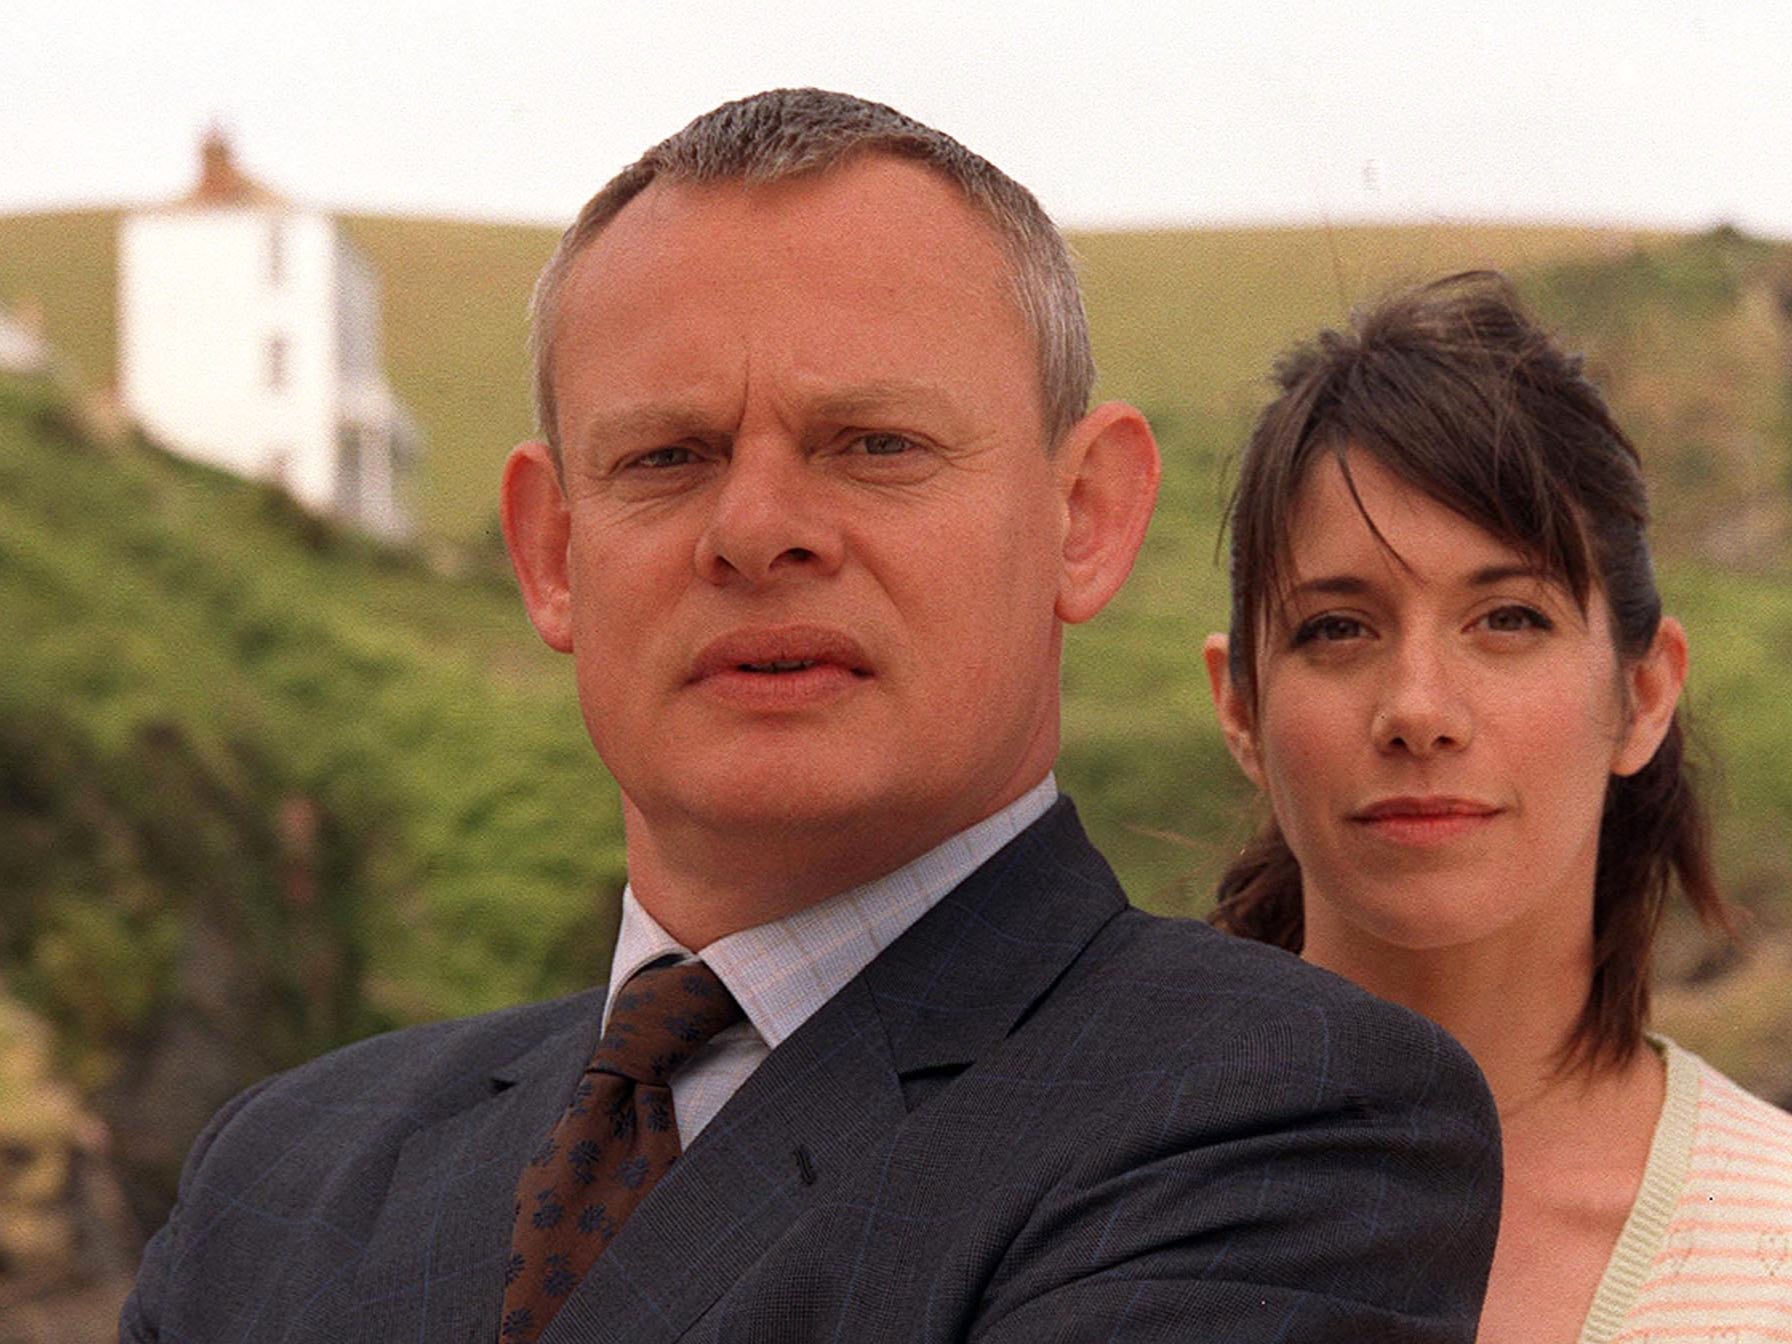 Martin Clunes starred as the cantankerous Doc Martin in the long-running ITV series